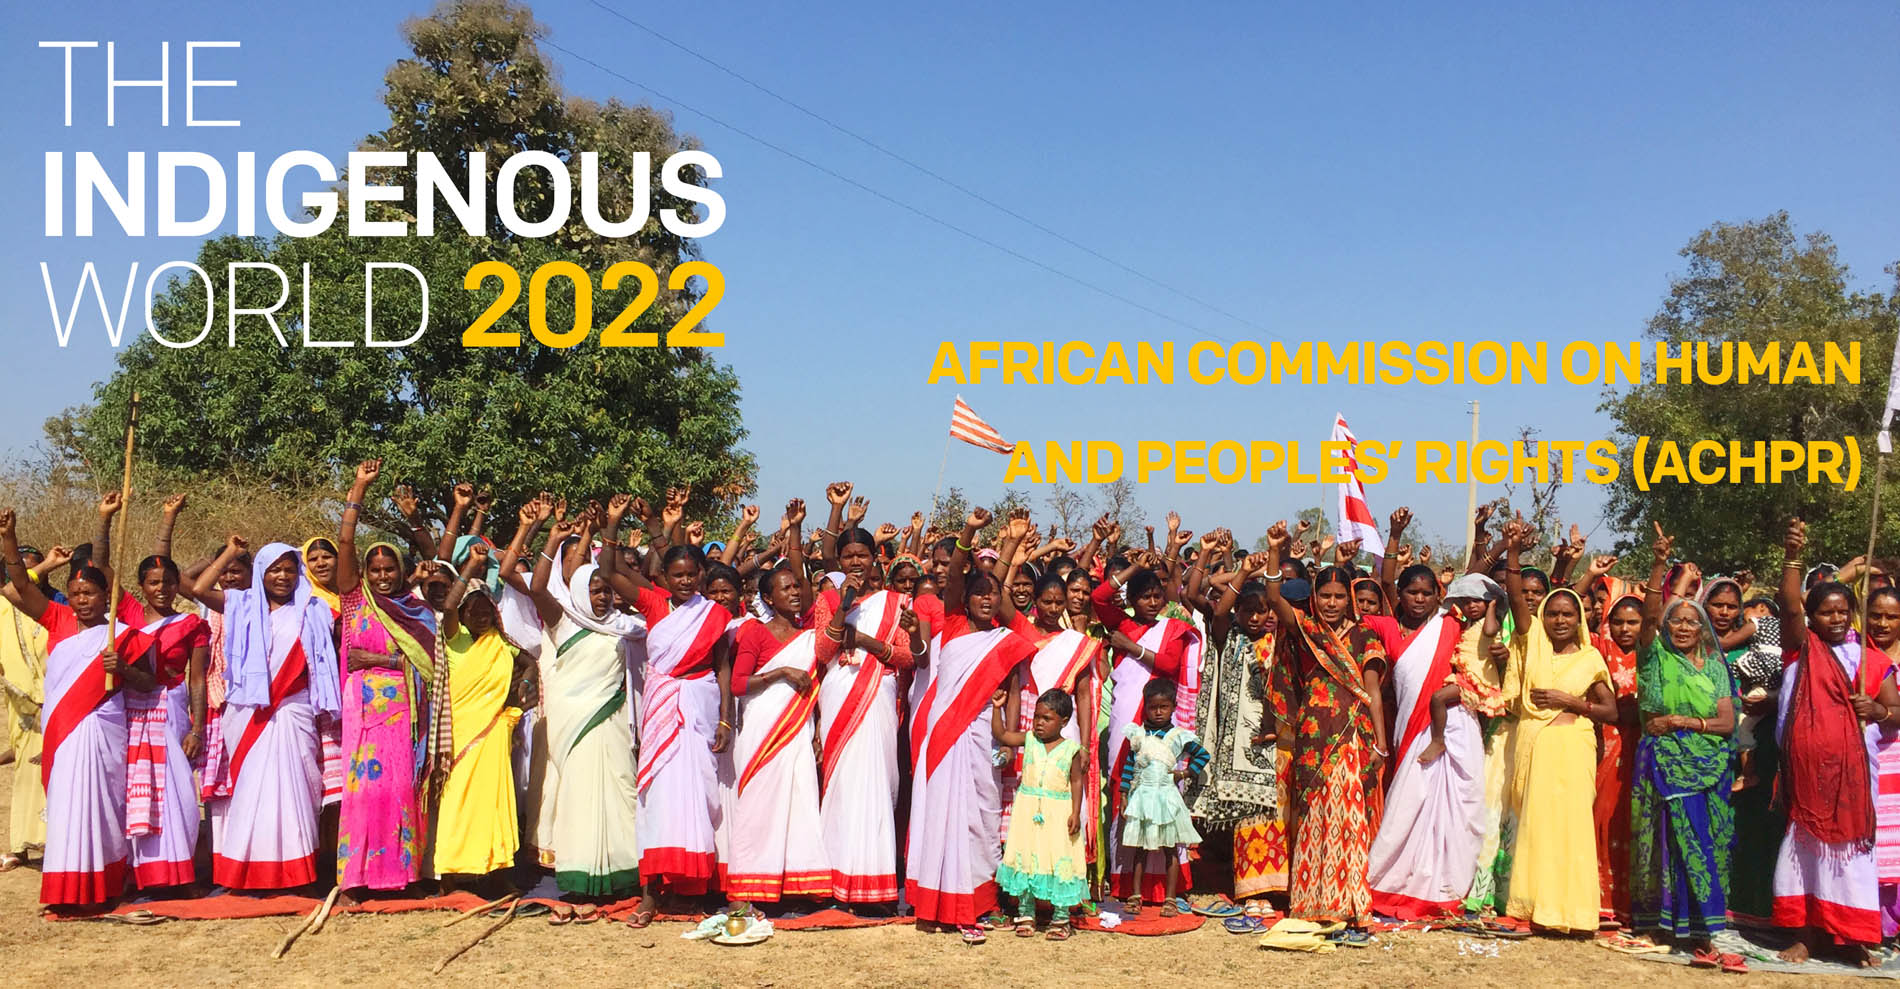 African Commission on Human and Peoples’ Rights (ACHPR)